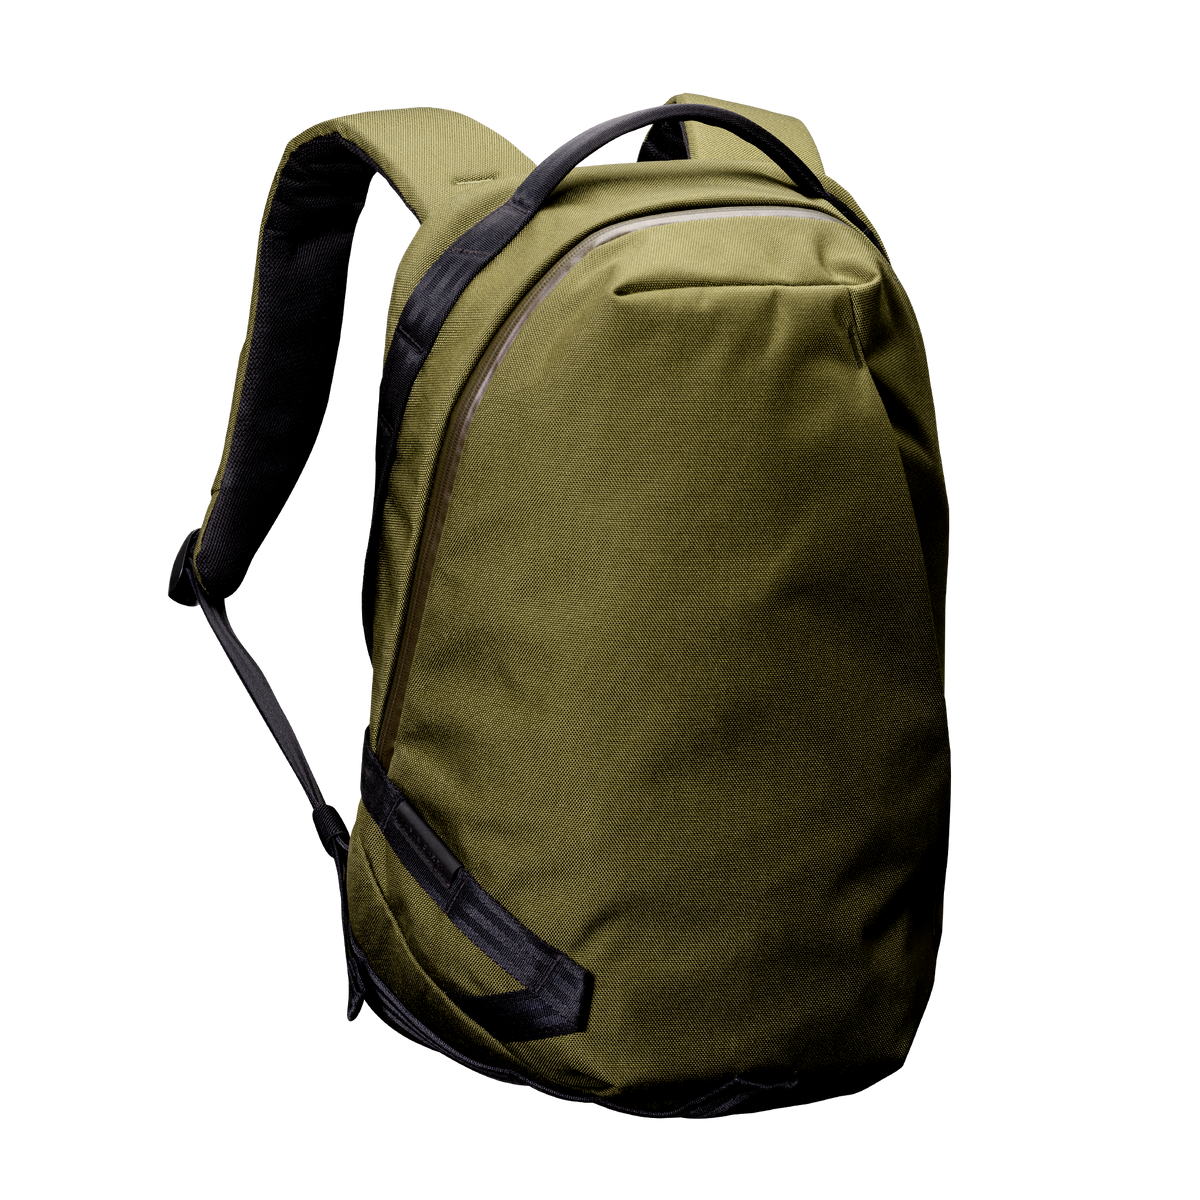 Able Carry Daily Backpack エイブルキャリー